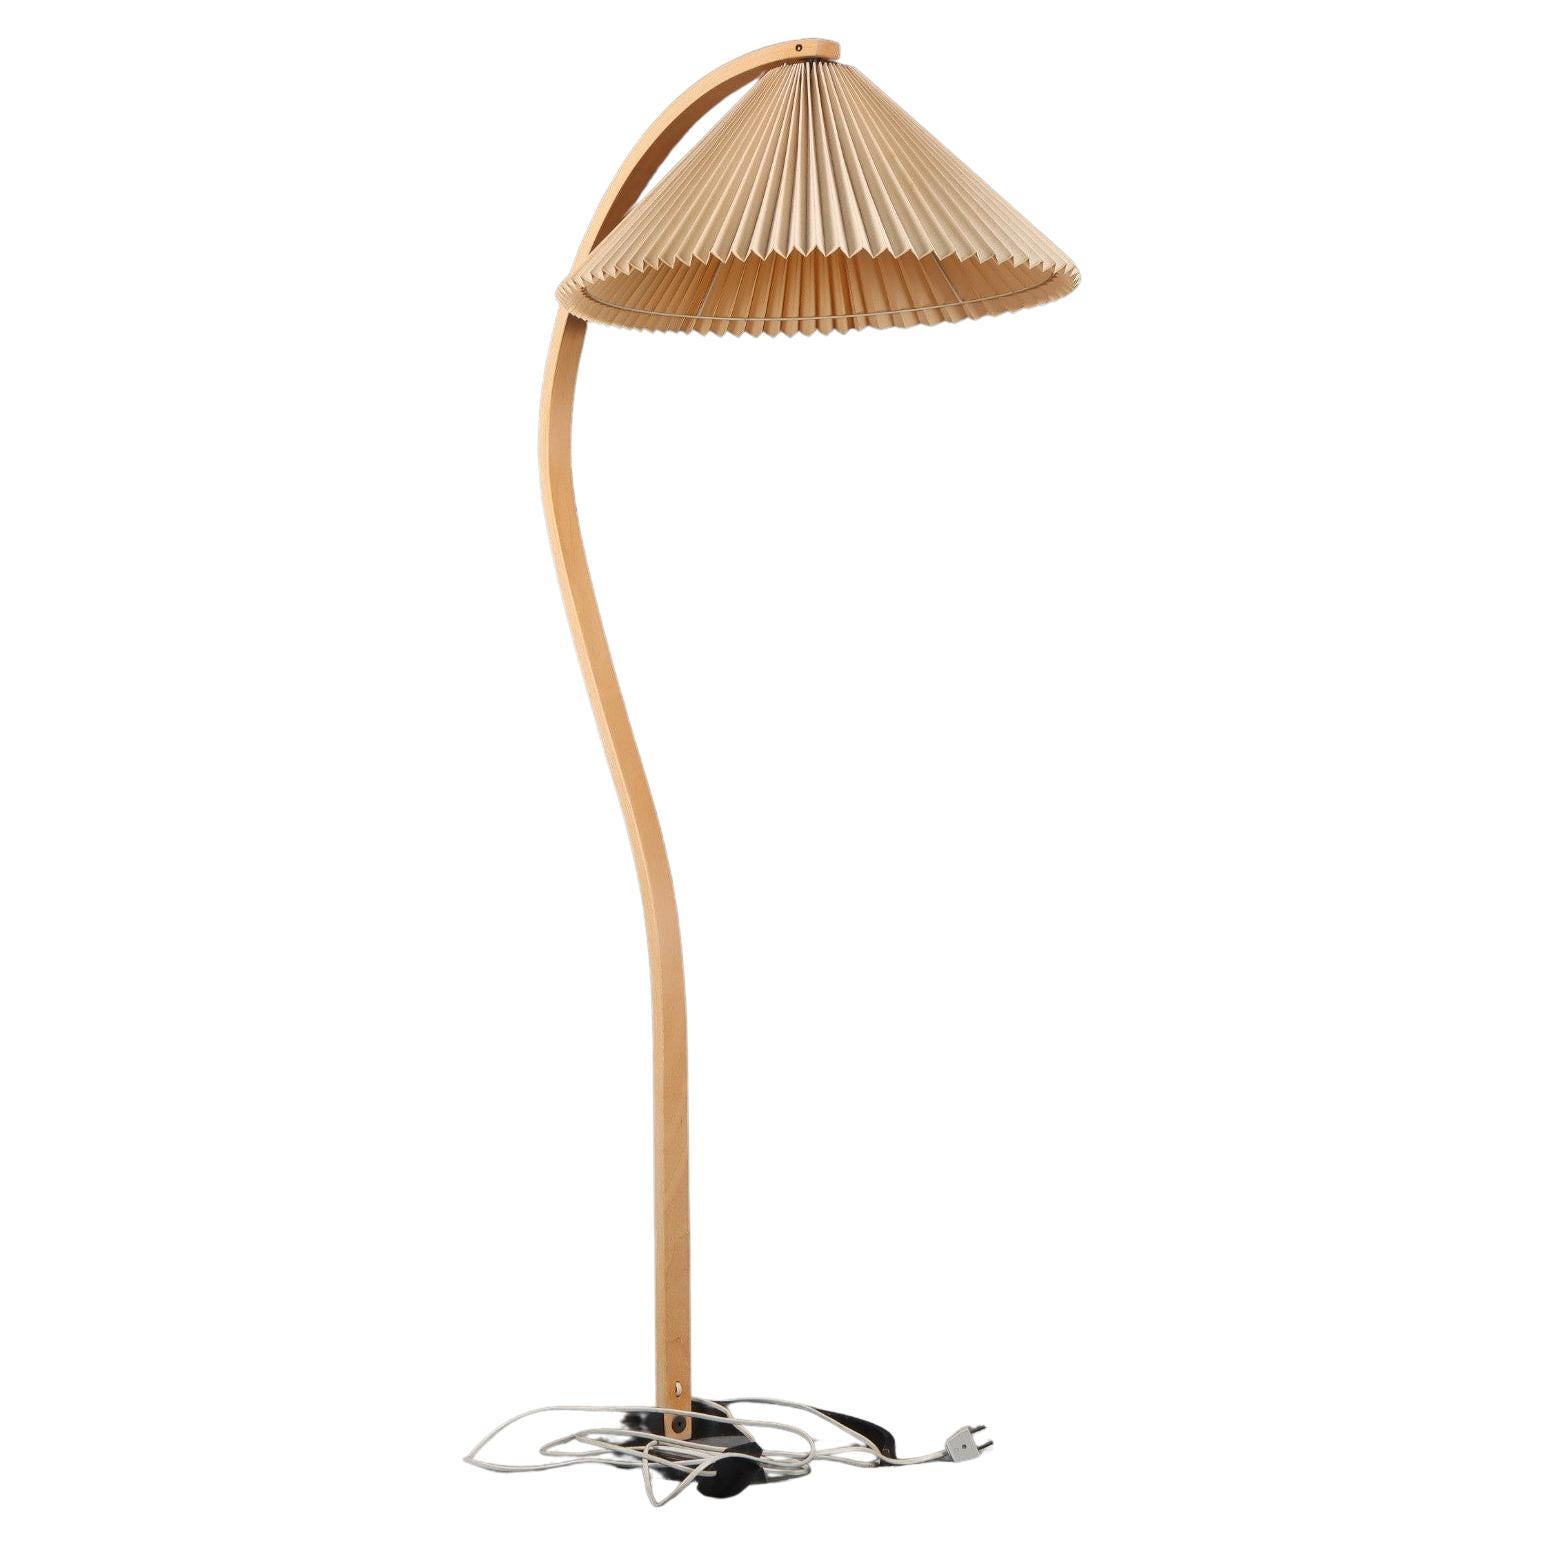 Elegant Mads Caprani Danish floor lamp, circa 1970's. Iconic bentwood beech stand is complemented by beige pleated shade.